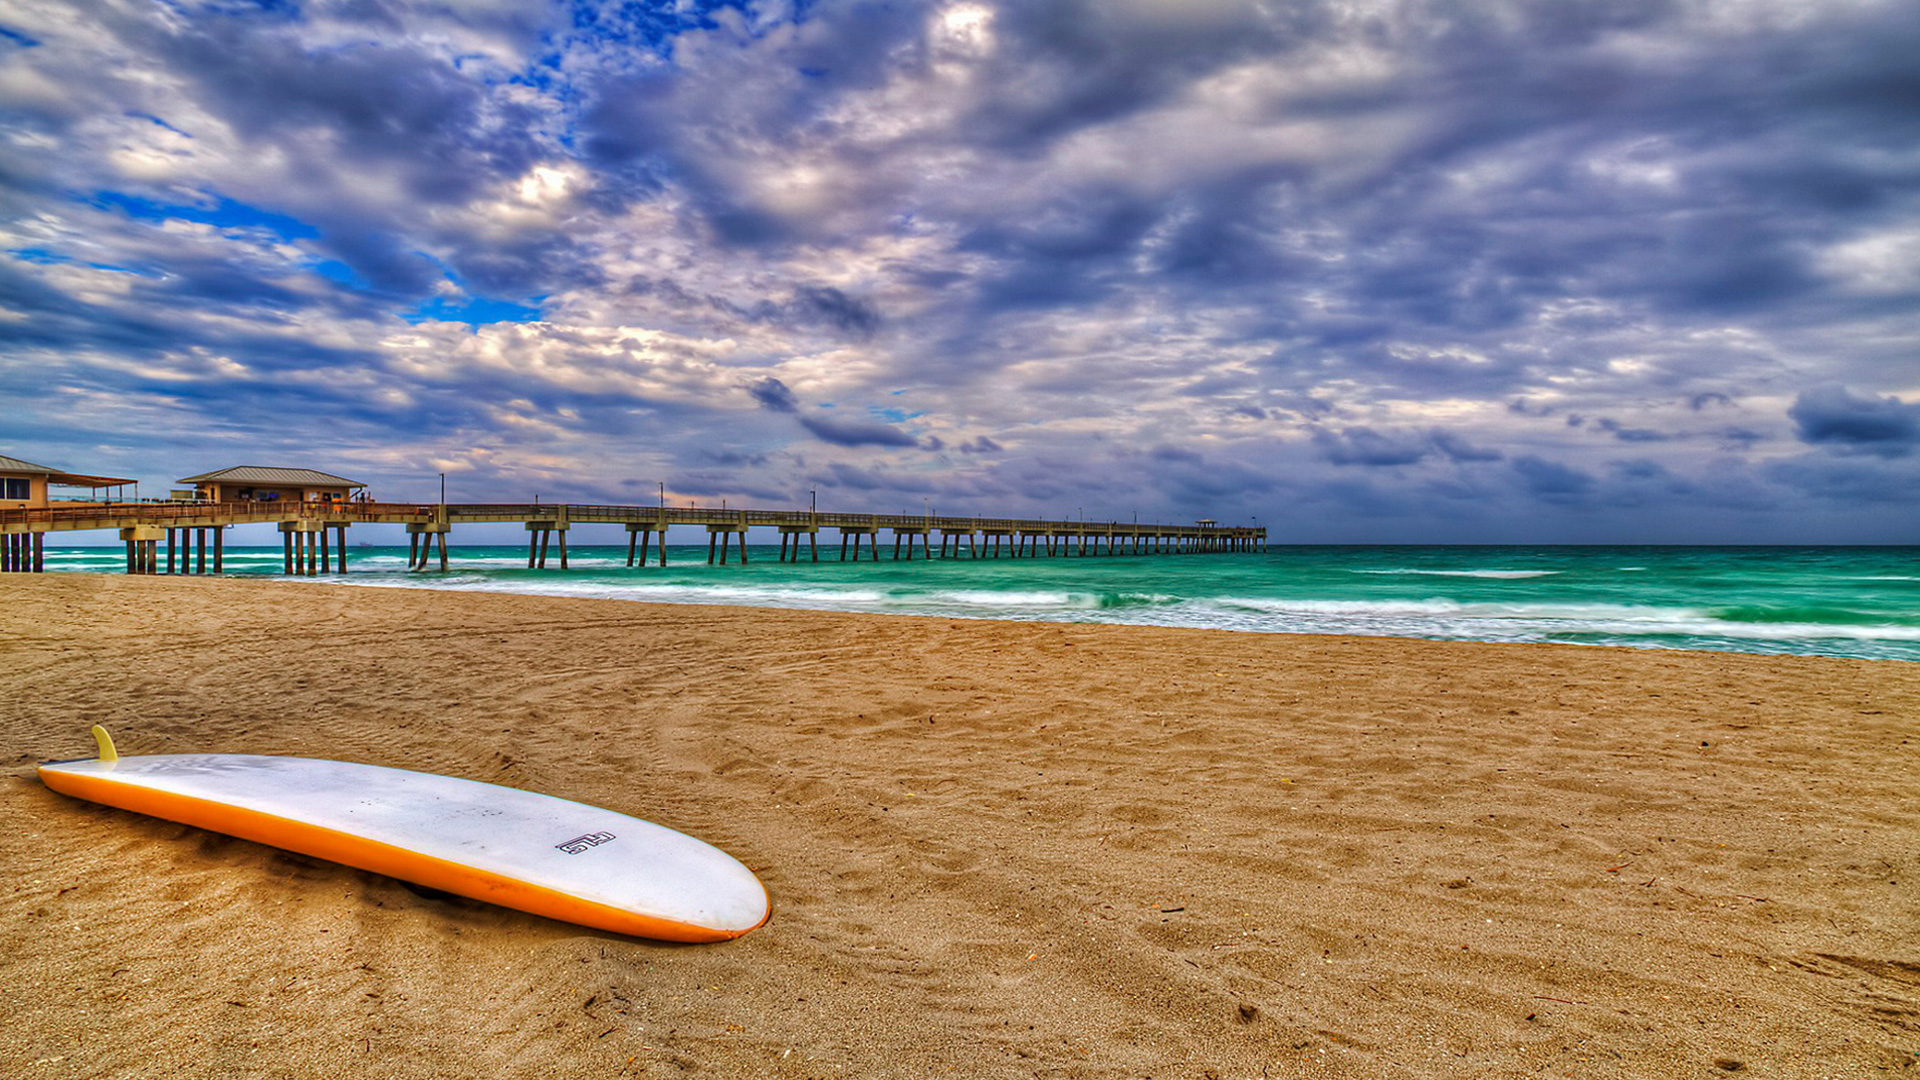 Surf Beach Images Free Download, Wallpapers, Backgrounds, Images